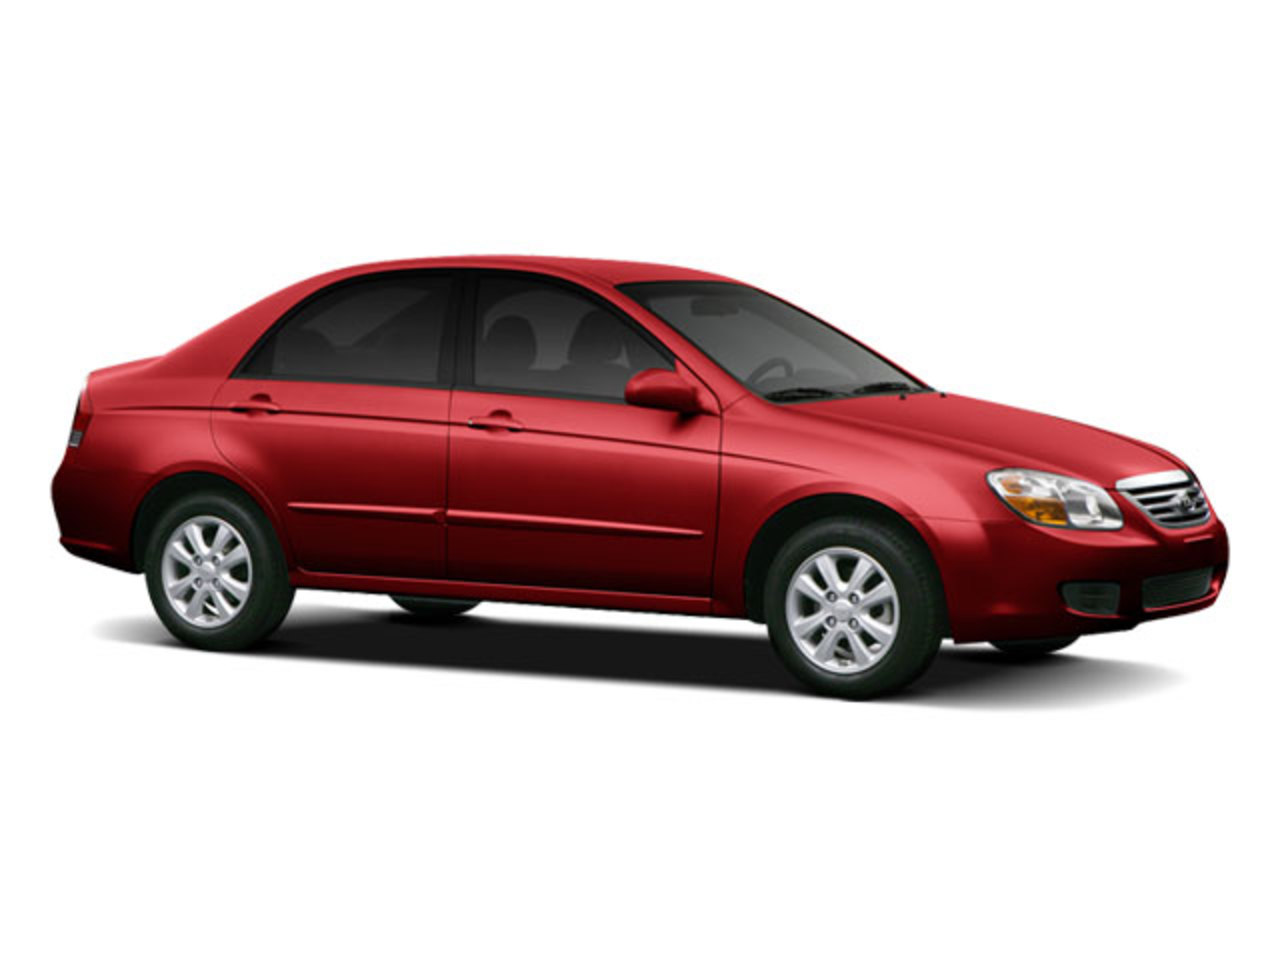 Tennessee Kia Spectra Vehicles For Sale - DealerRater